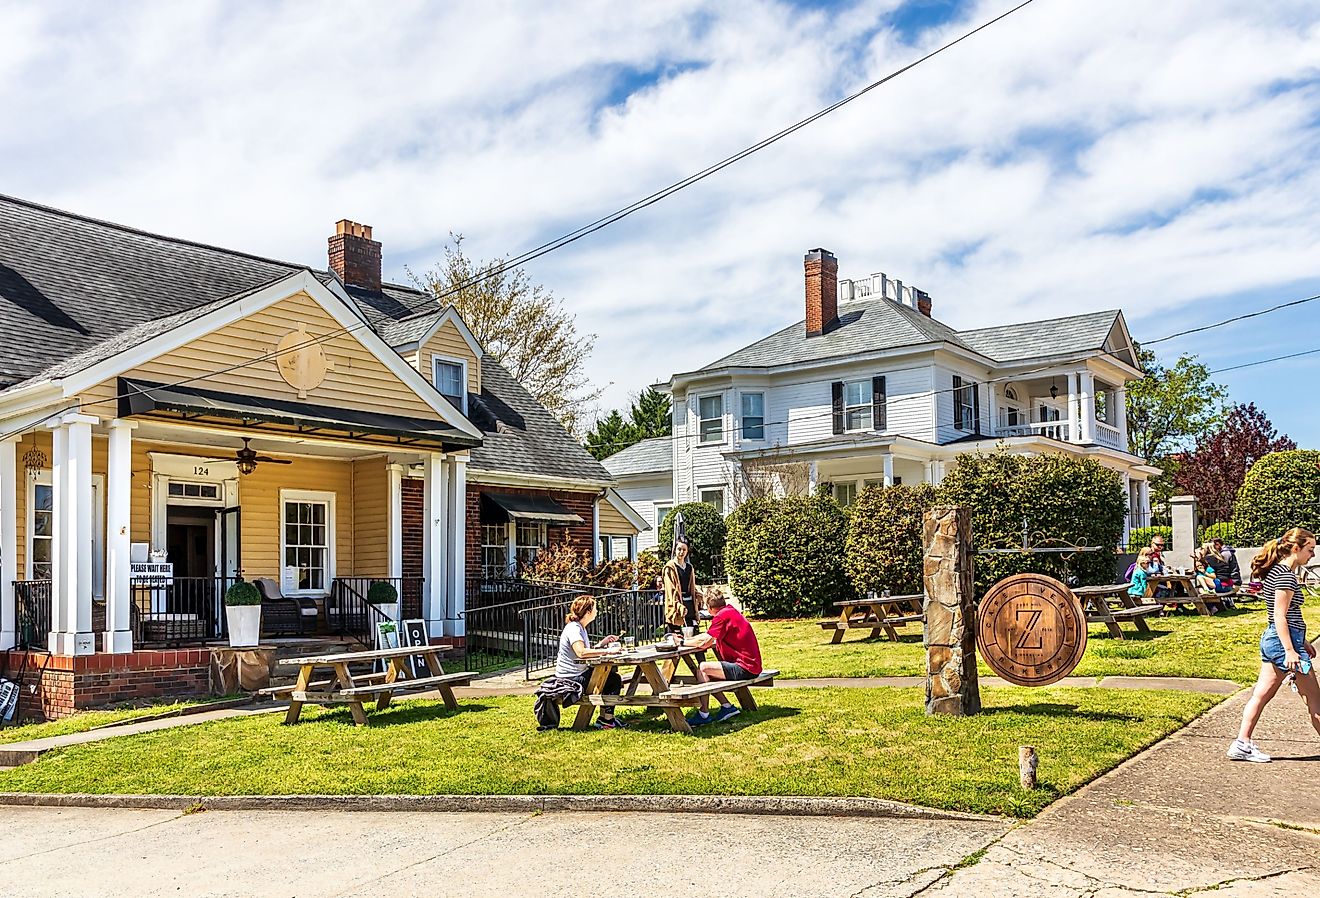 Bakery and cafe in downtown Fort Mill, with multiple people eating outside on picnic tables. Image credit Nolichuckyjake via Shutterstock.